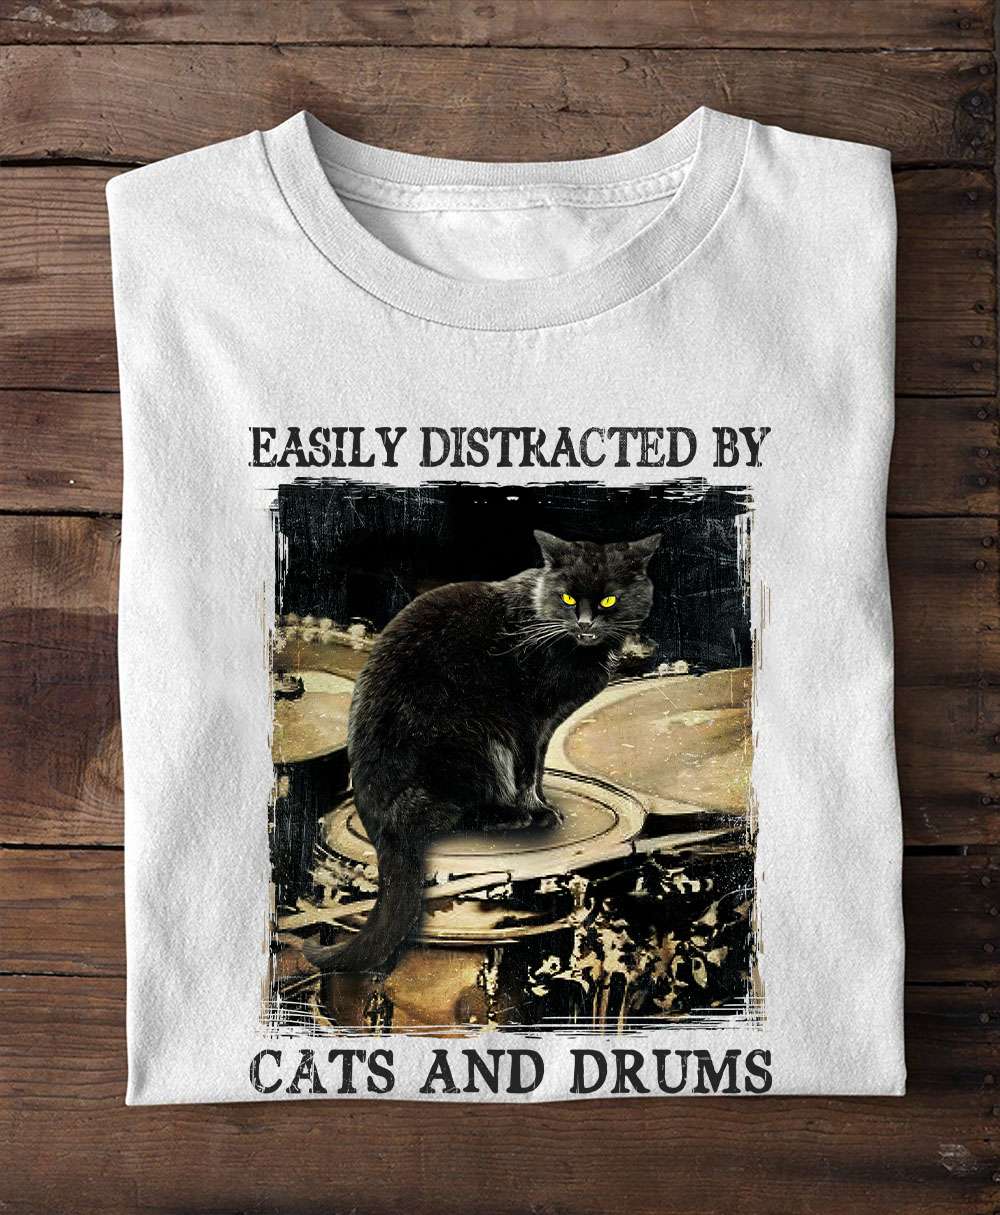 Easily distracted by cats and drums - Passionate drummers